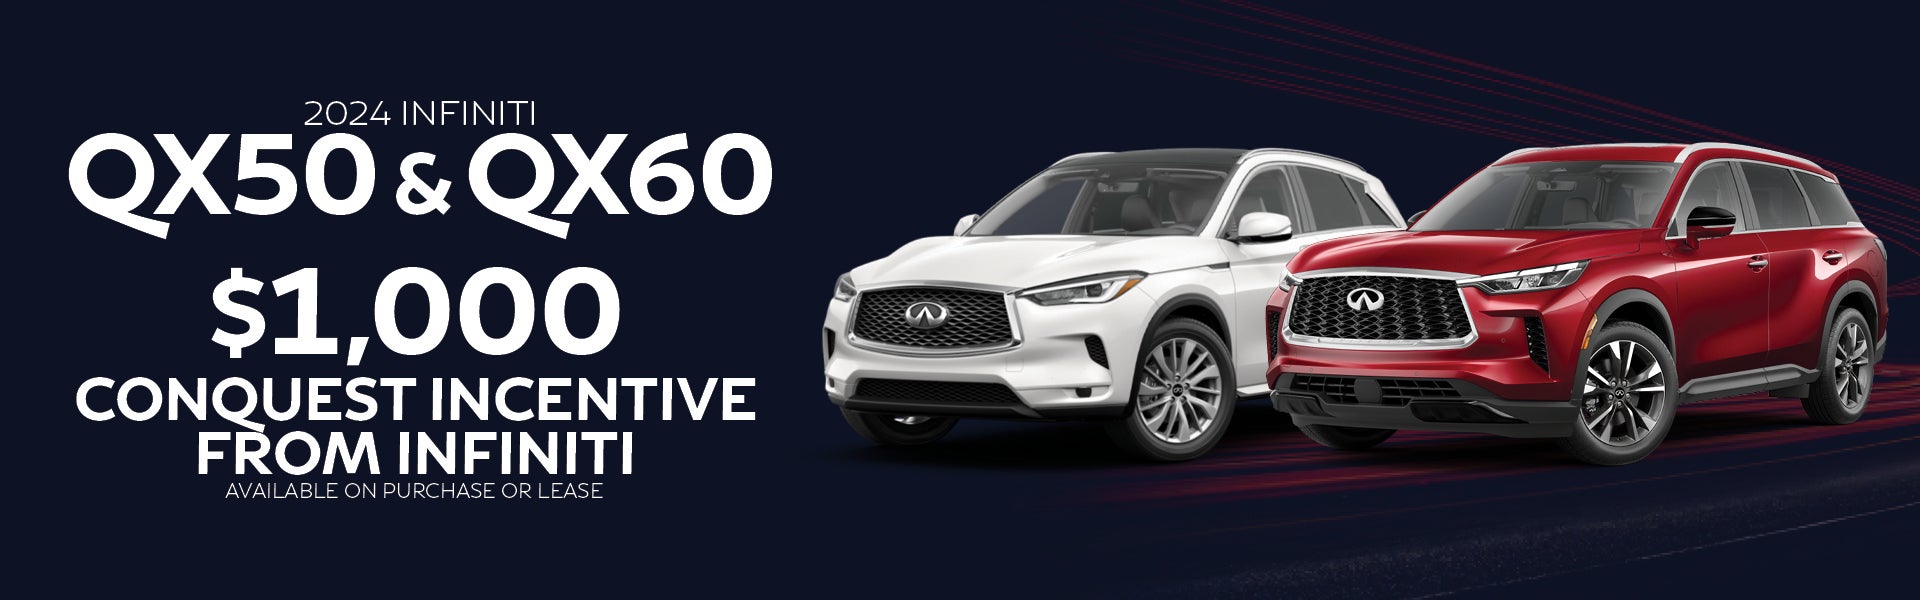 $1,000 conquest cash on 2024 QX50 and QX60